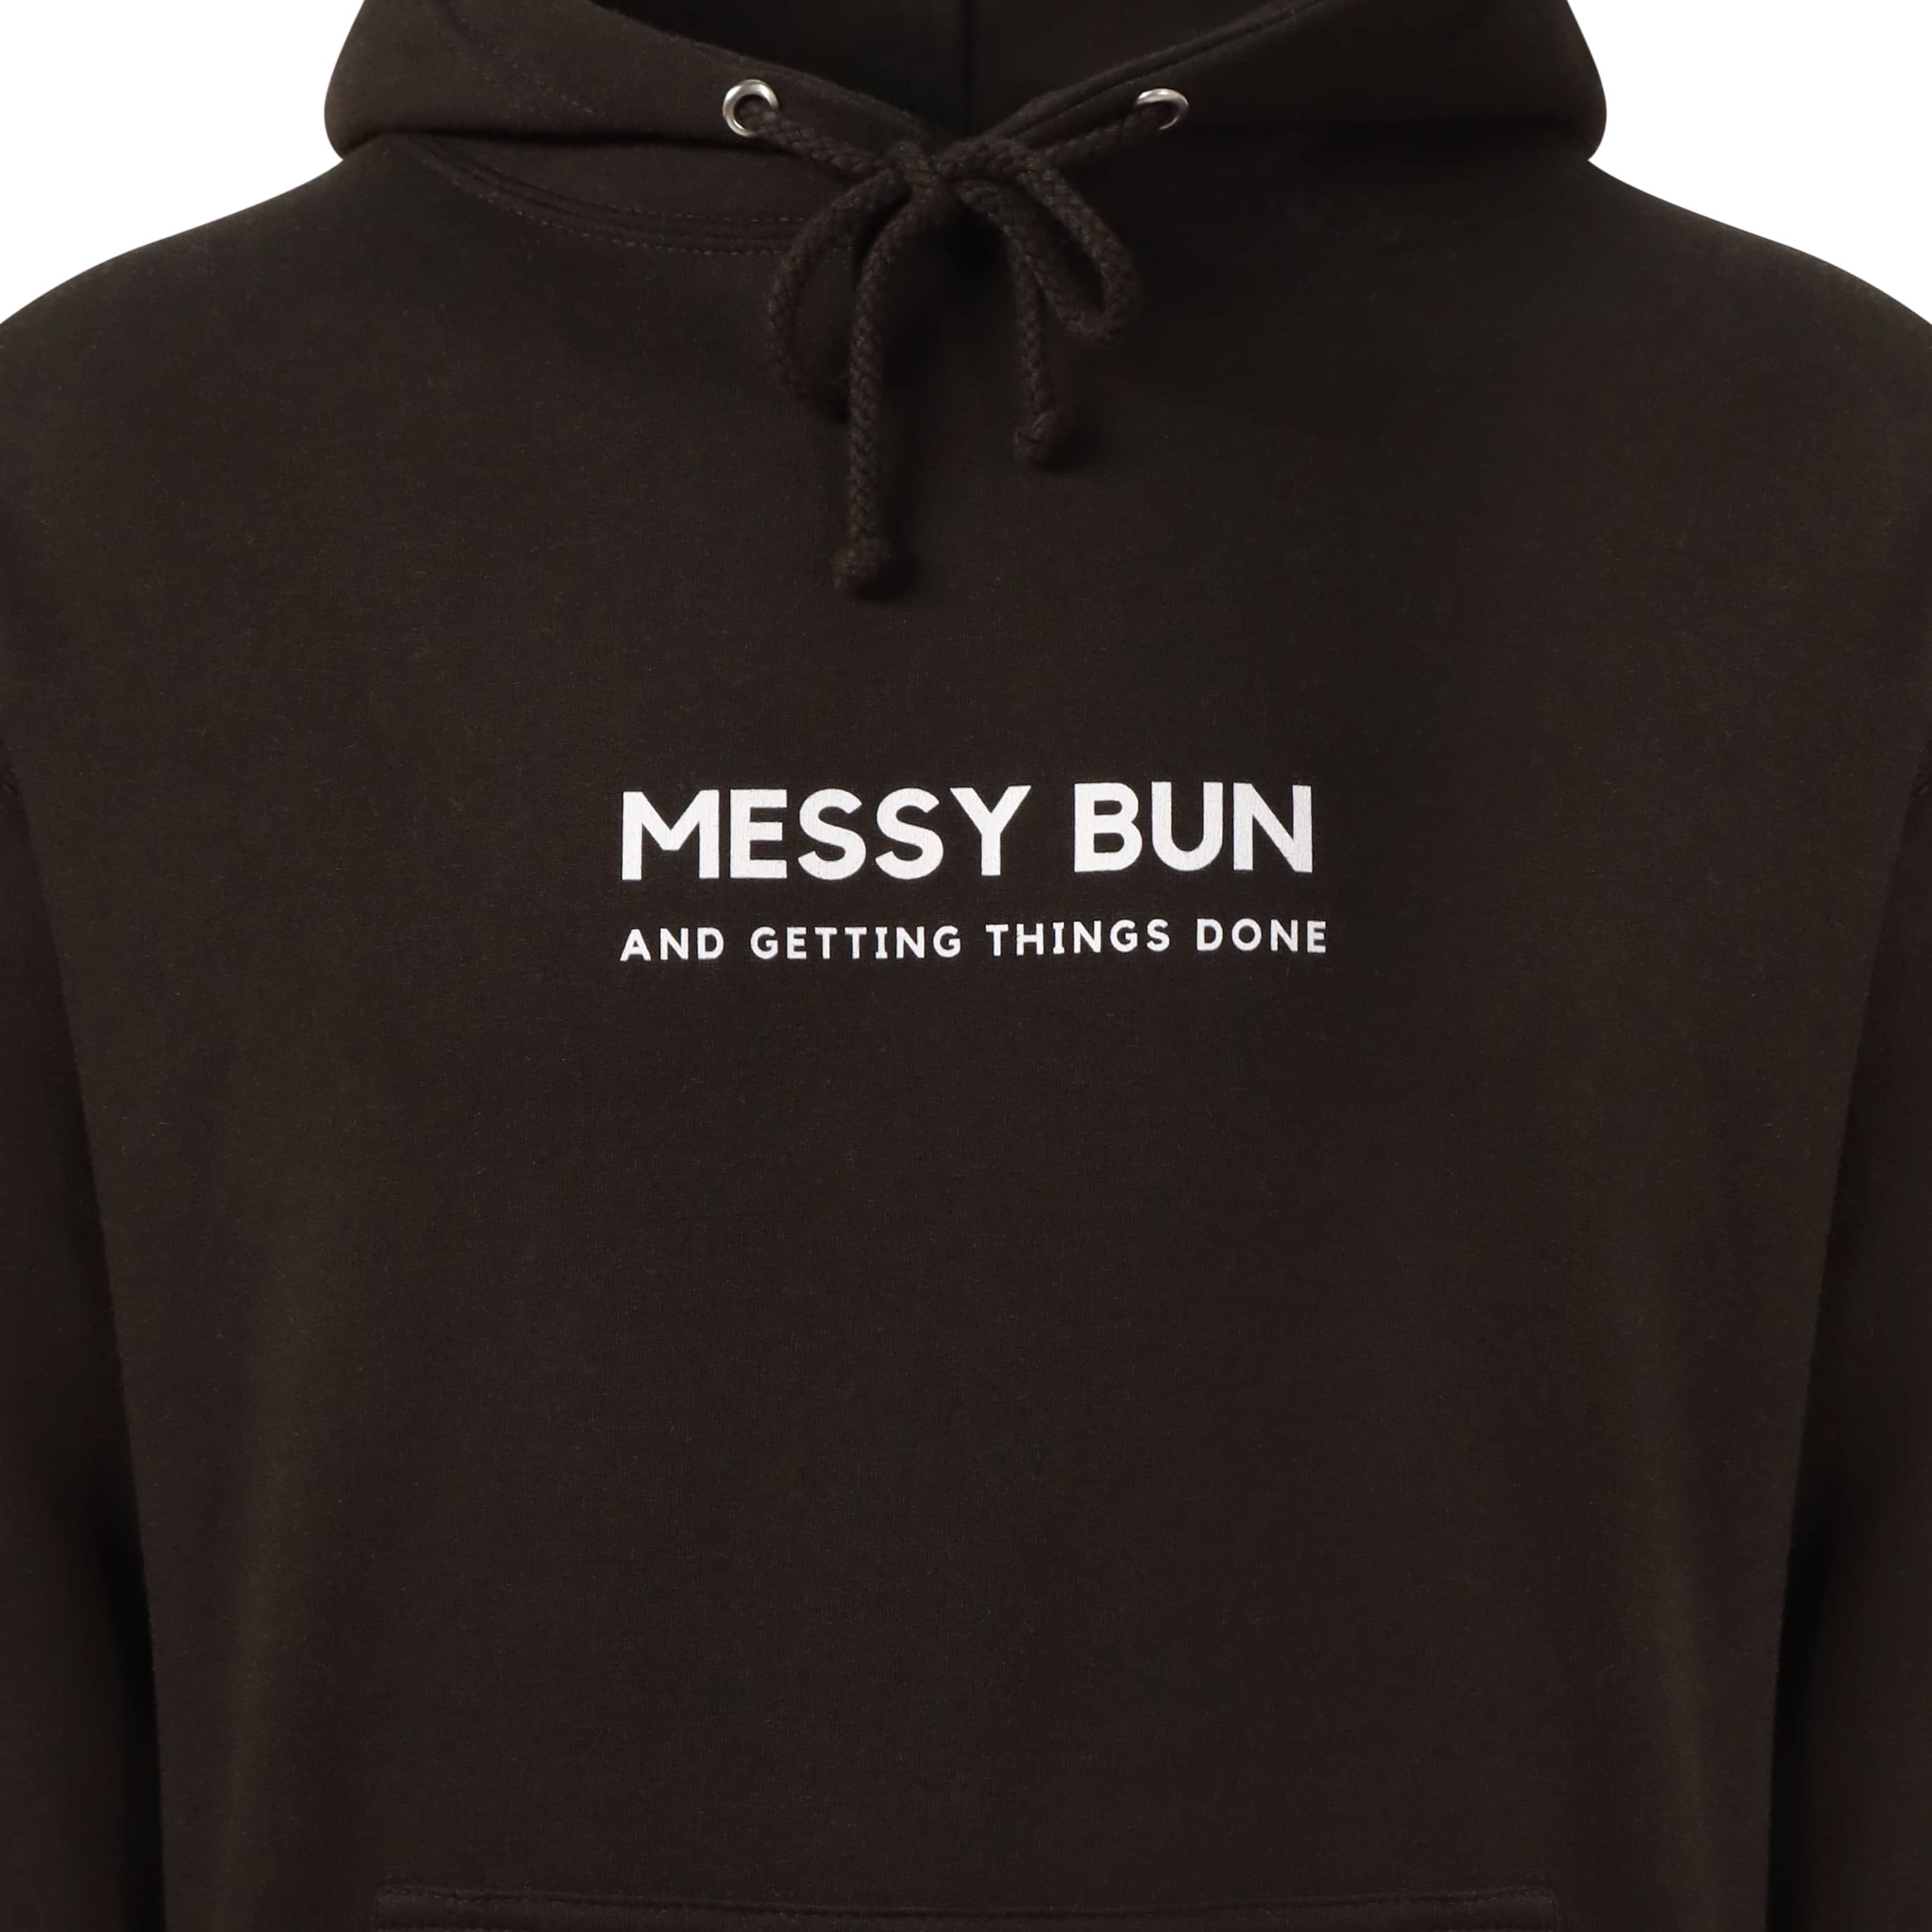 Black hoody that reads: Messy bun and getting things done in white text. Text is in a sans font all caps, messy bun is written bigger than getting things done